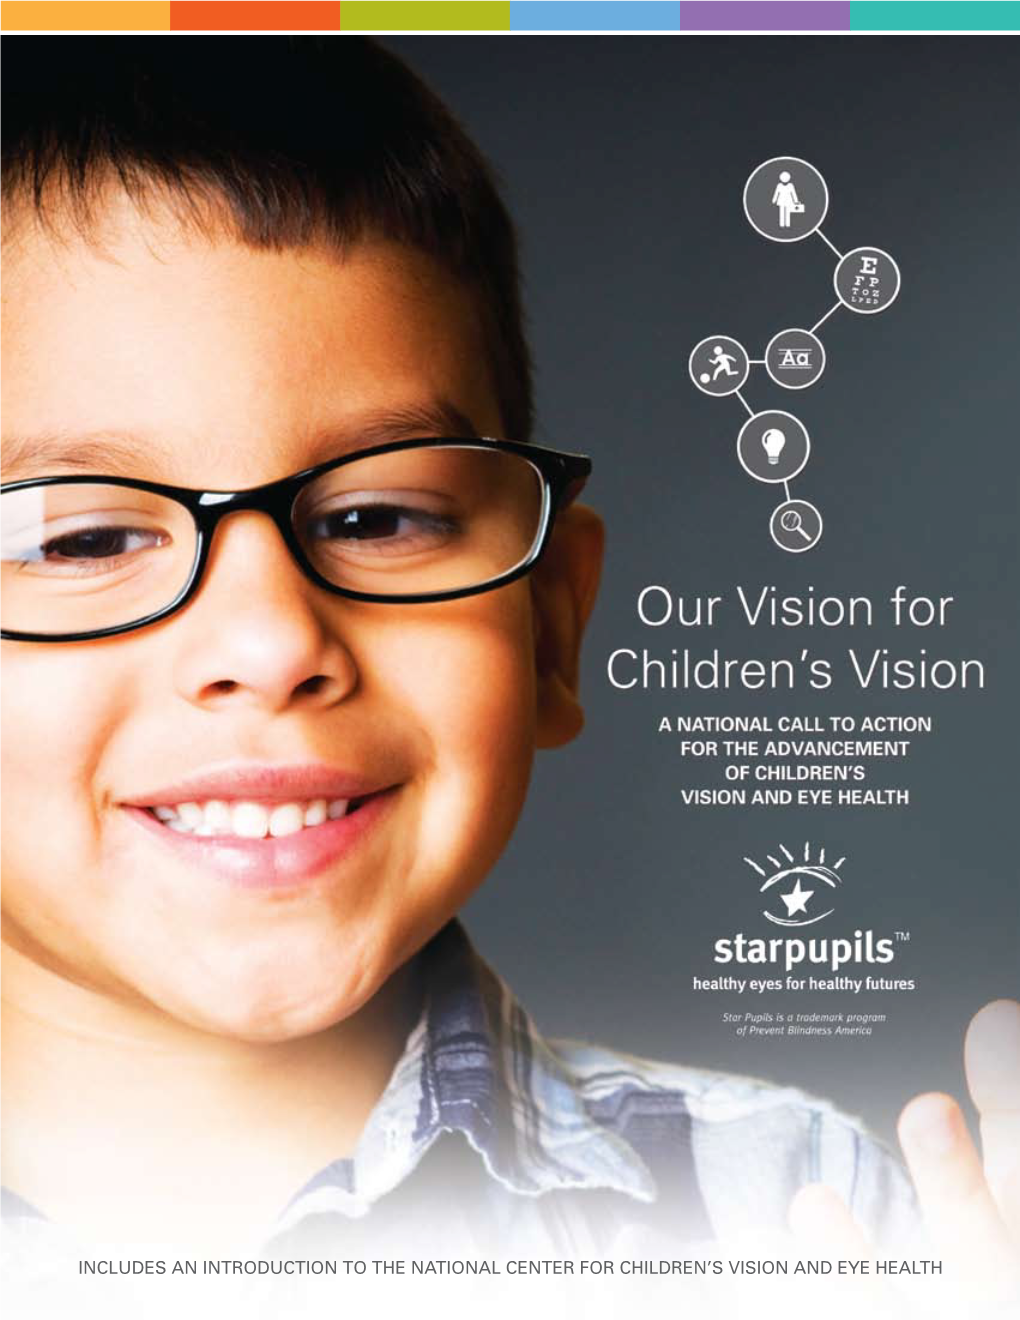 INCLUDES an INTRODUCTION to the NATIONAL CENTER for CHILDREN’S VISION and EYE HEALTH Table of Contents